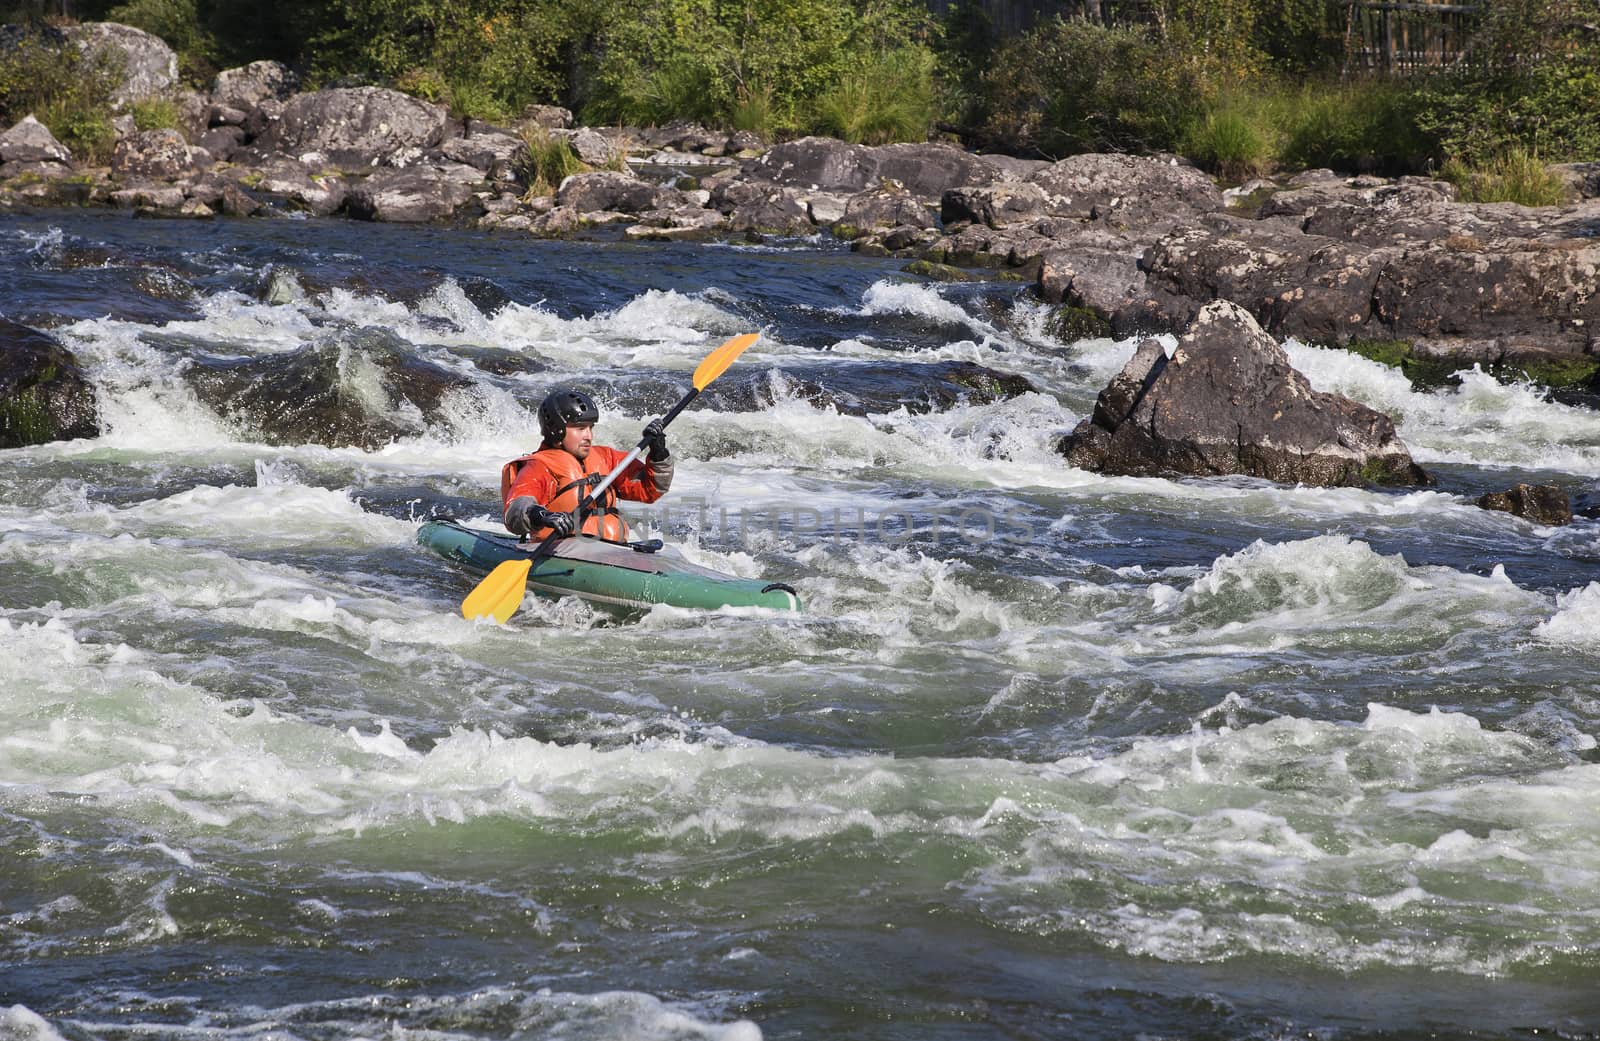 Kayaker in the  whitewater of a river Umba in Russia